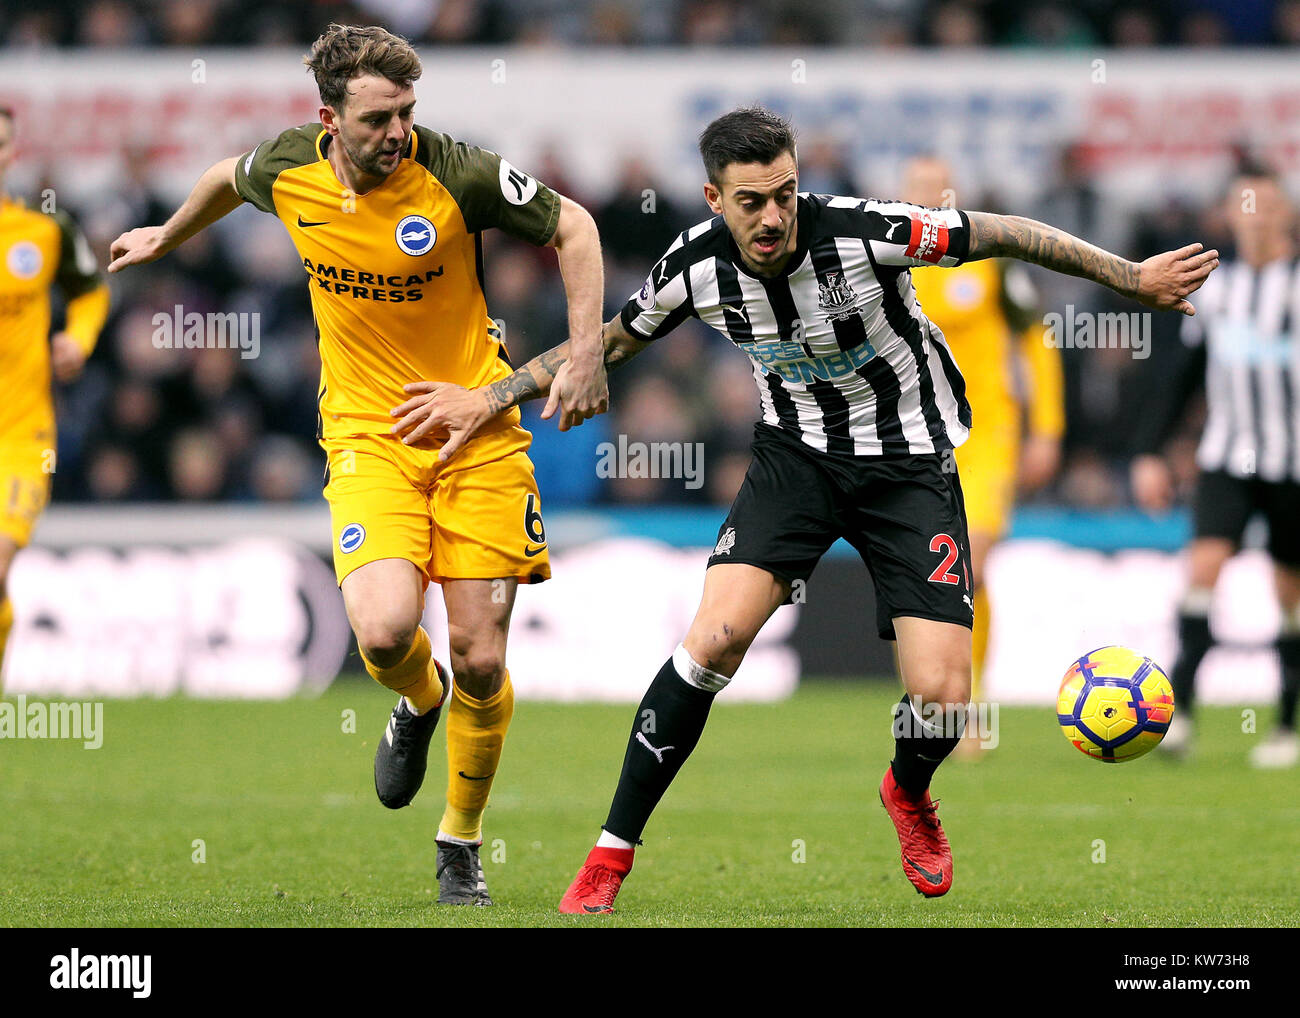 Newcastle United's DeAndre Yedlin (right) and Brighton & Hove Albion's Dale Stephens during the Premier League match at St James' Park, Newcastle. Stock Photo